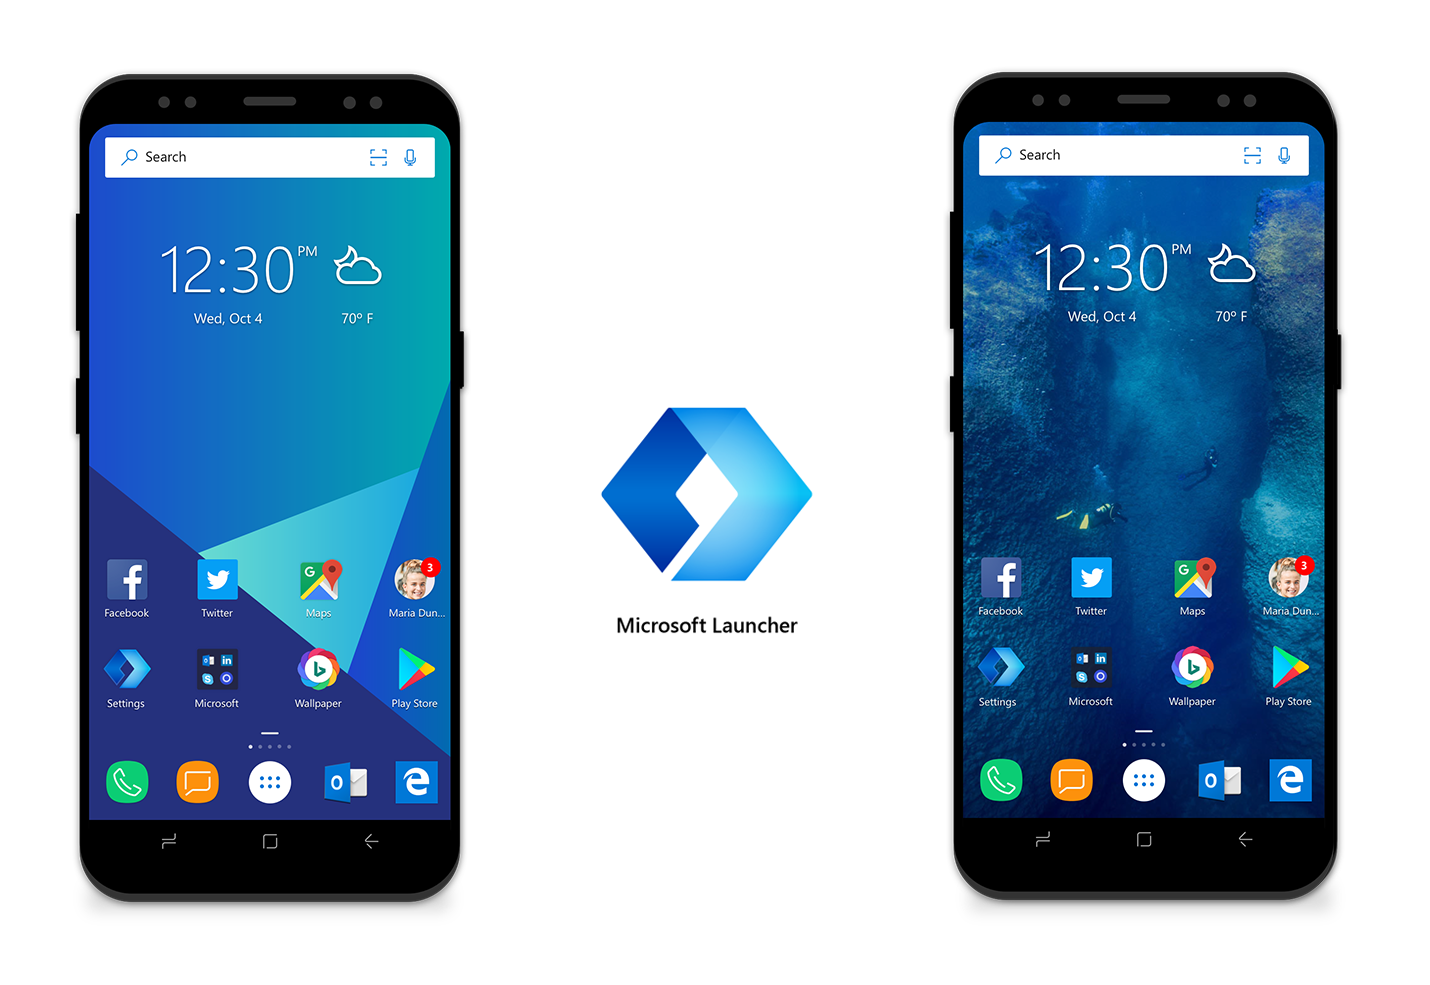 Microsoft Launcher brings Android and Windows 10 closer - Microsoft, Android, W3bsit3-dns.com, Longpost